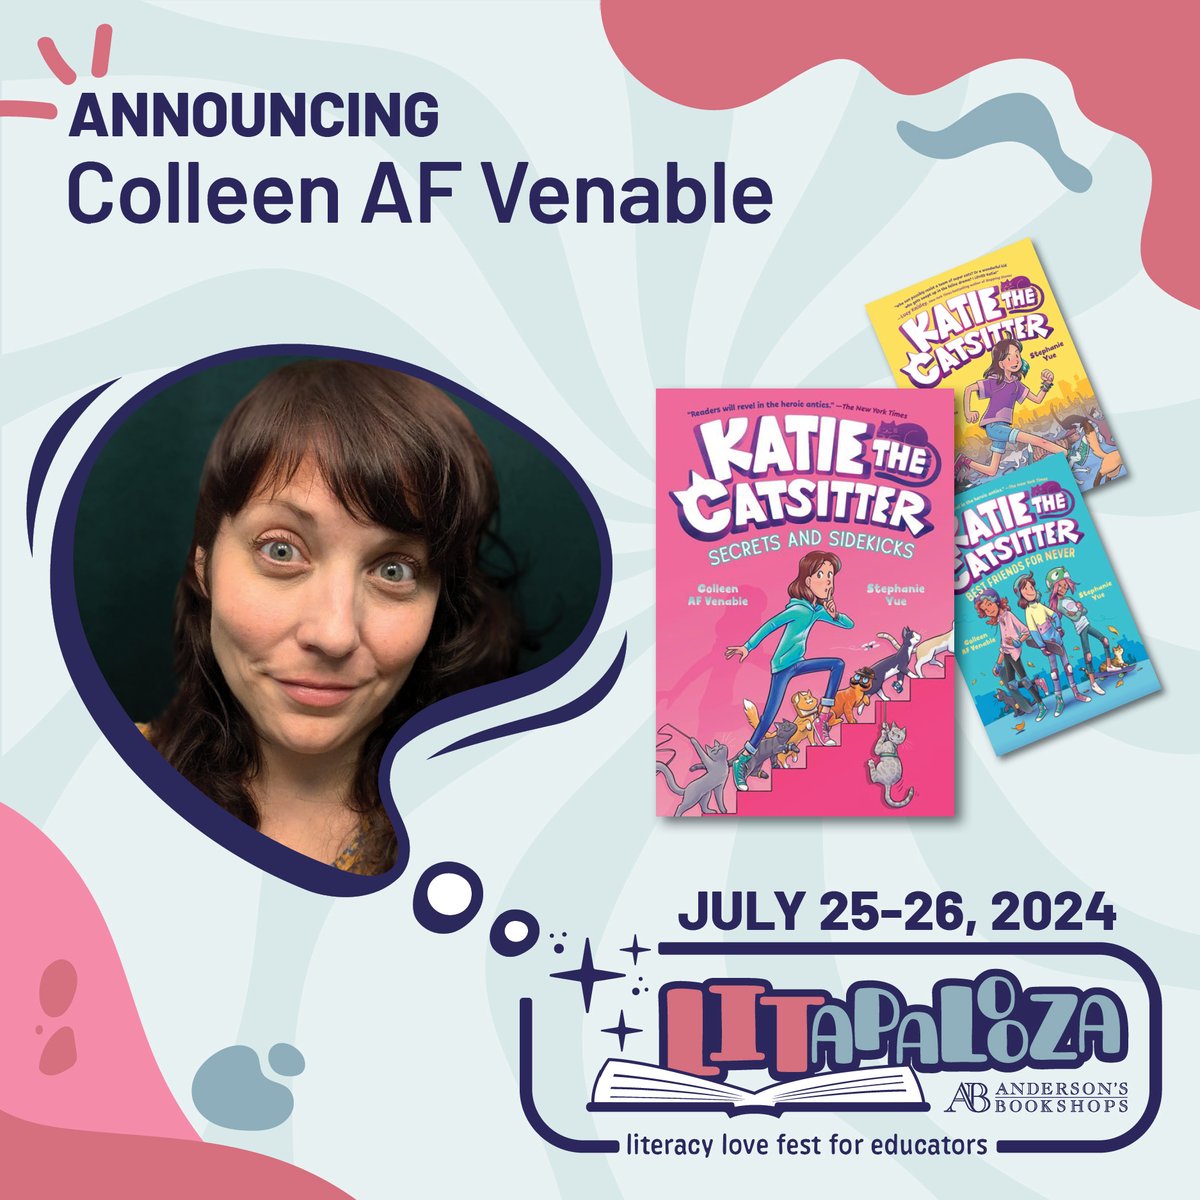 Who will you have Colleen AF Venable @colleenaf personalize your books to? She will hang out with YOU for two days of literacy love, breakout sessions and author signings geared towards educators! More details and register here: LITapalooza2024.eventcombo.com